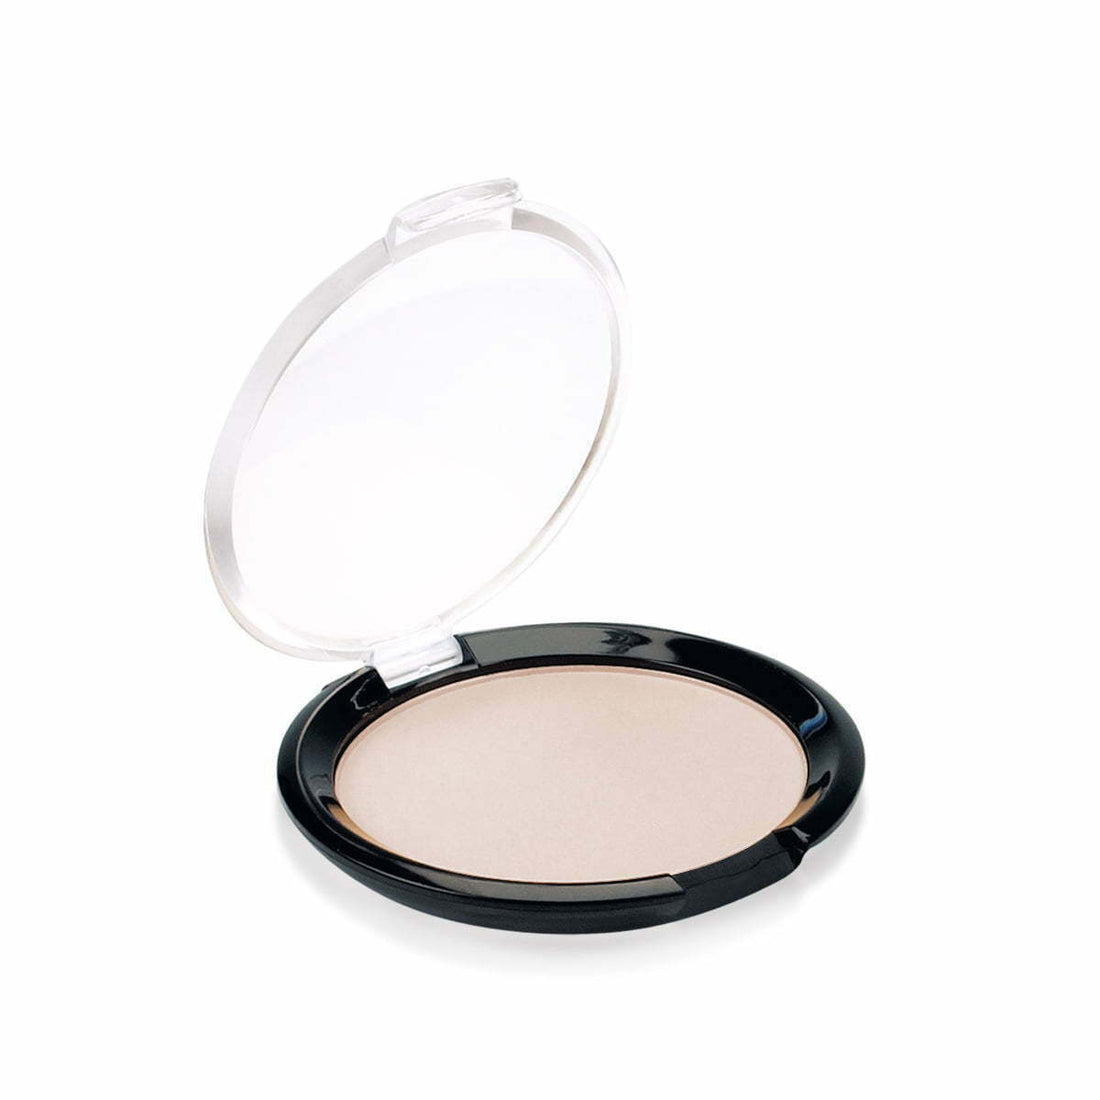 Golden Rose Silky Touch Compact Powder (12g) - No-01